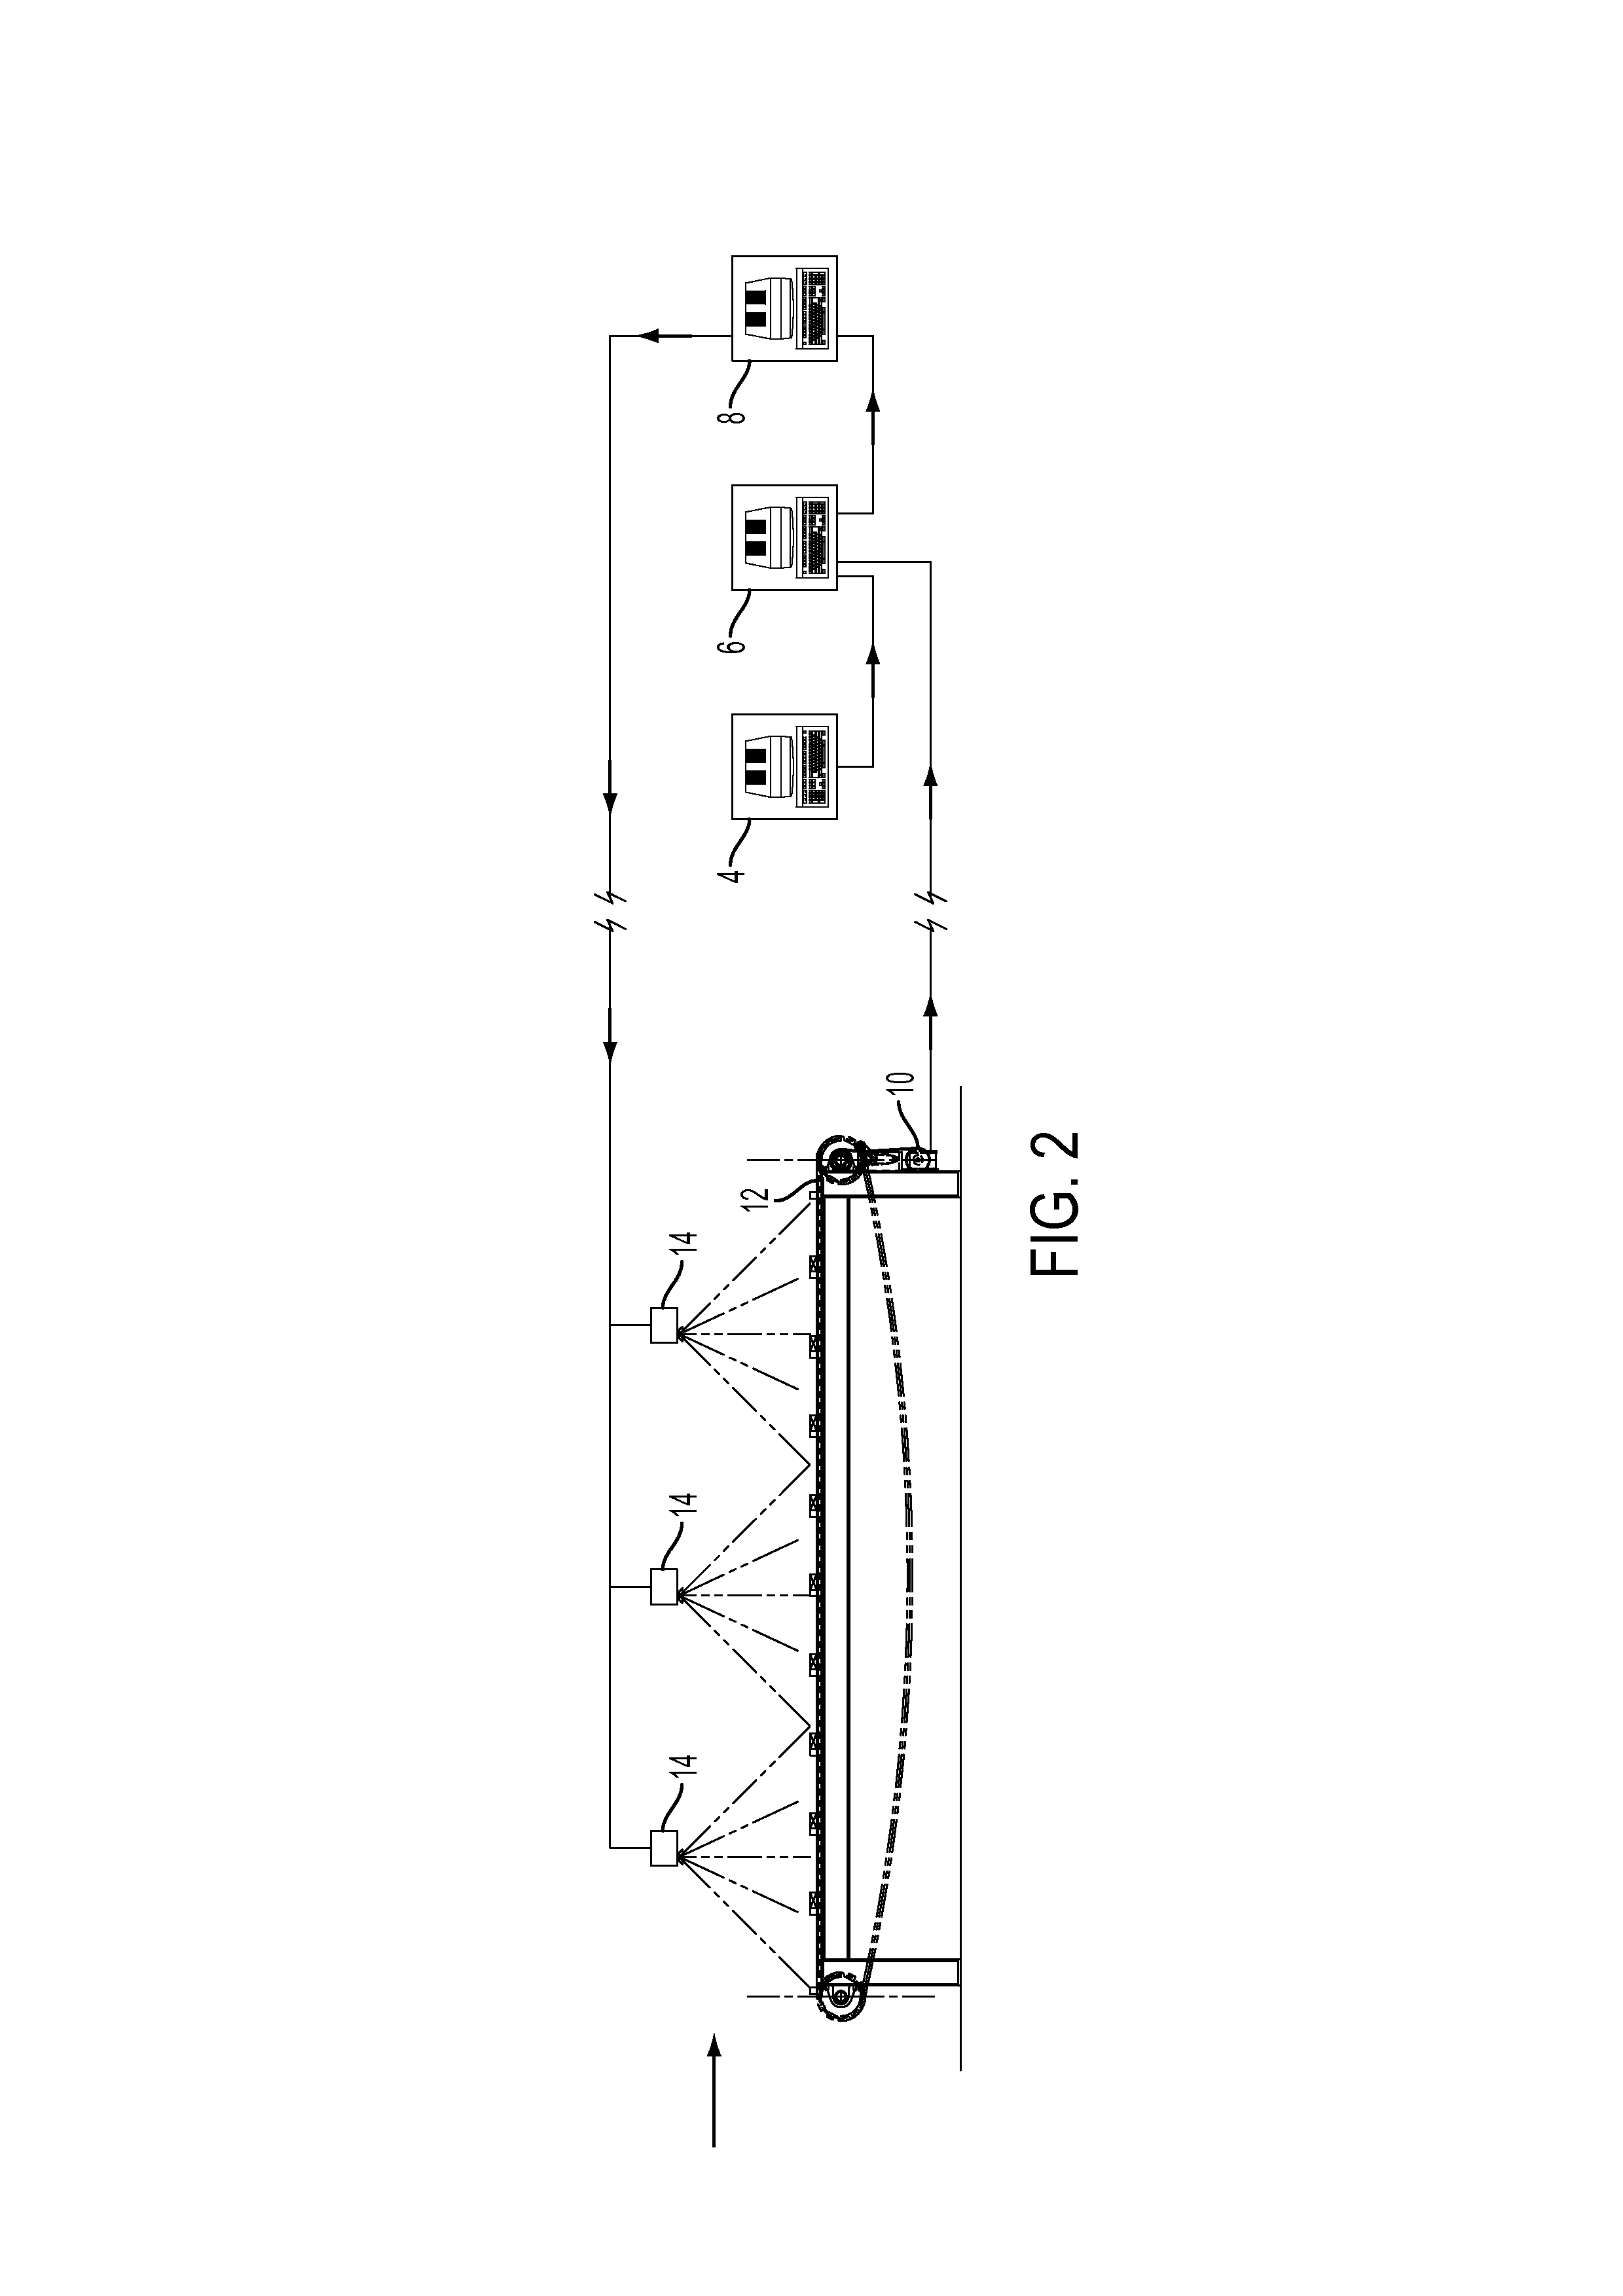 Apparatus and method for manually confirming electronically stored information regarding a piece of lumber